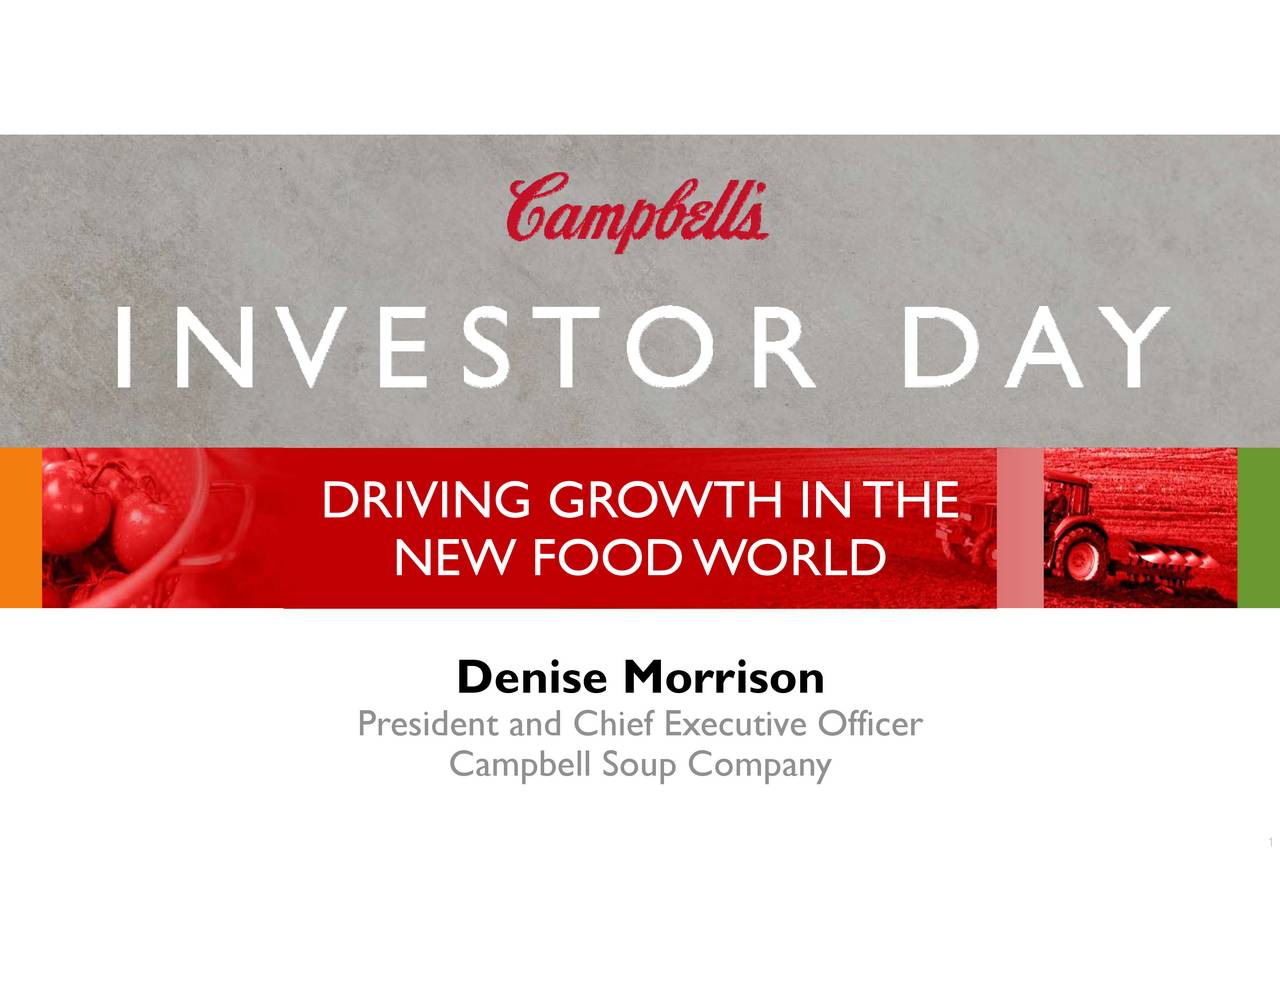 DeniCampbell Soup Company NEW FOODWORLD President and Chief Executive Officer DRIVING GROWTH INTHE